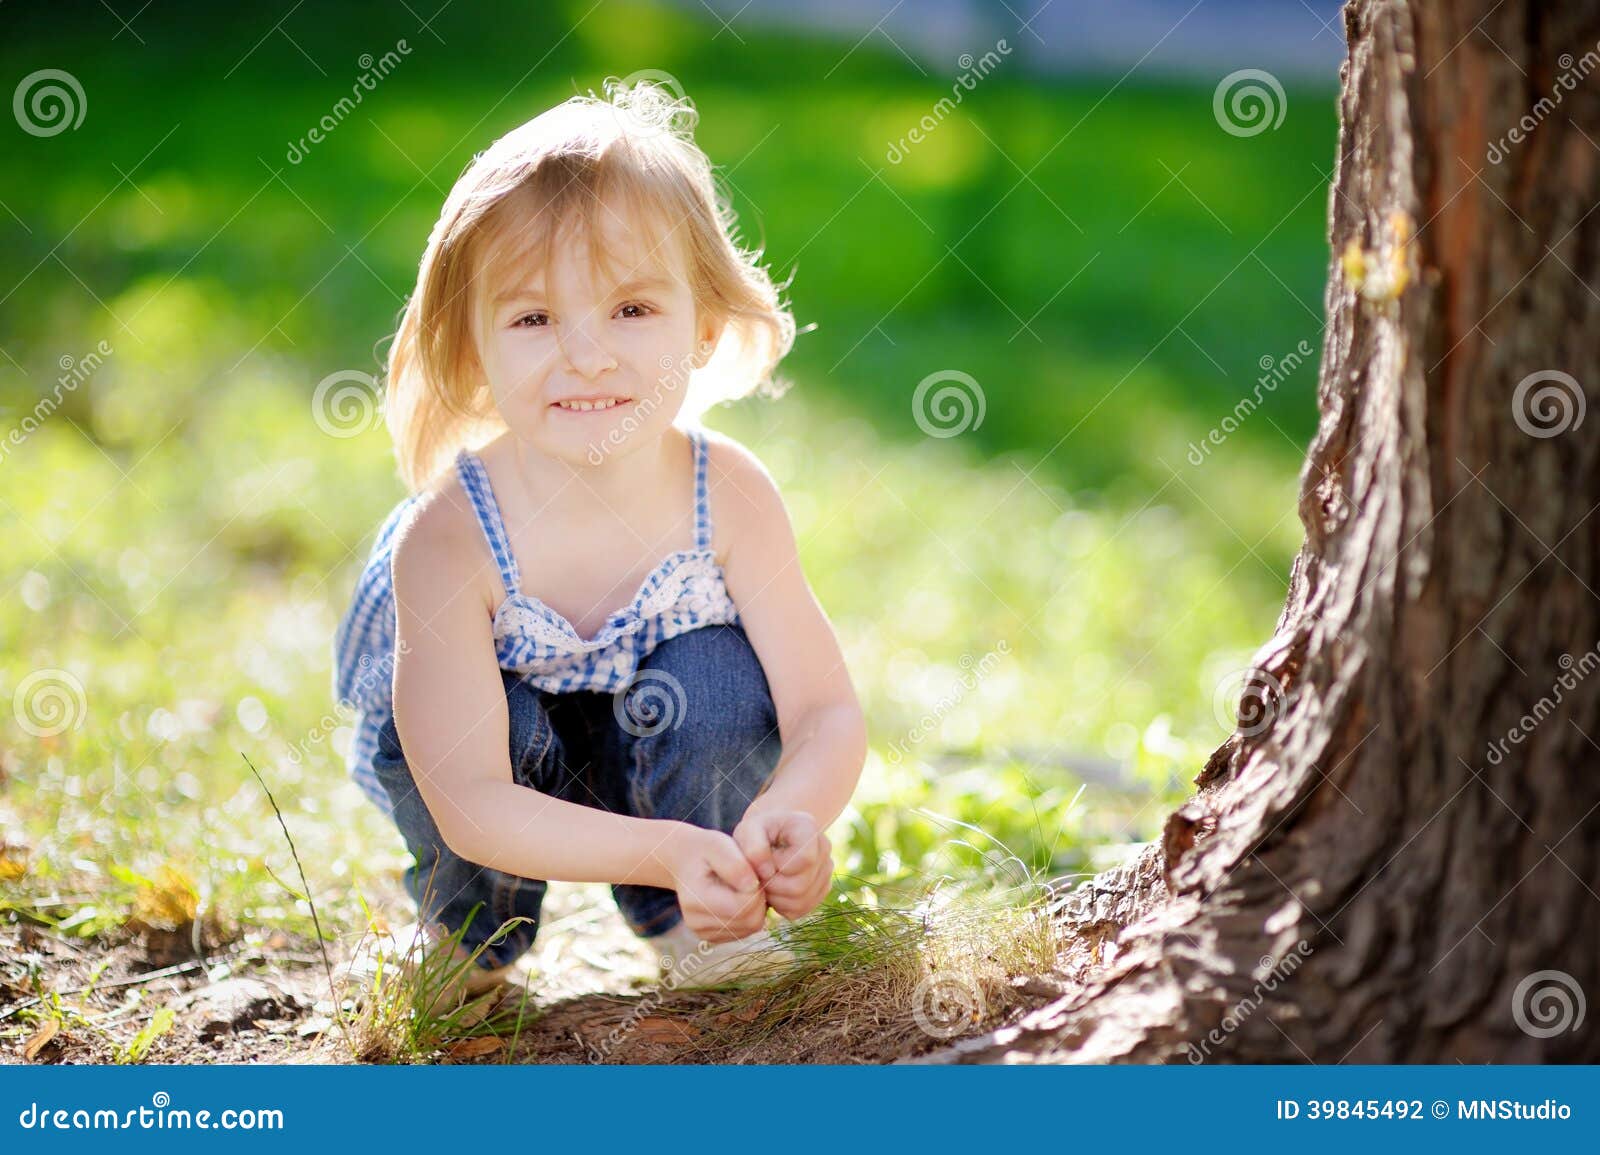 Adorable Little Girl Outdoors Stock Photo - Image of autumn, bright ...